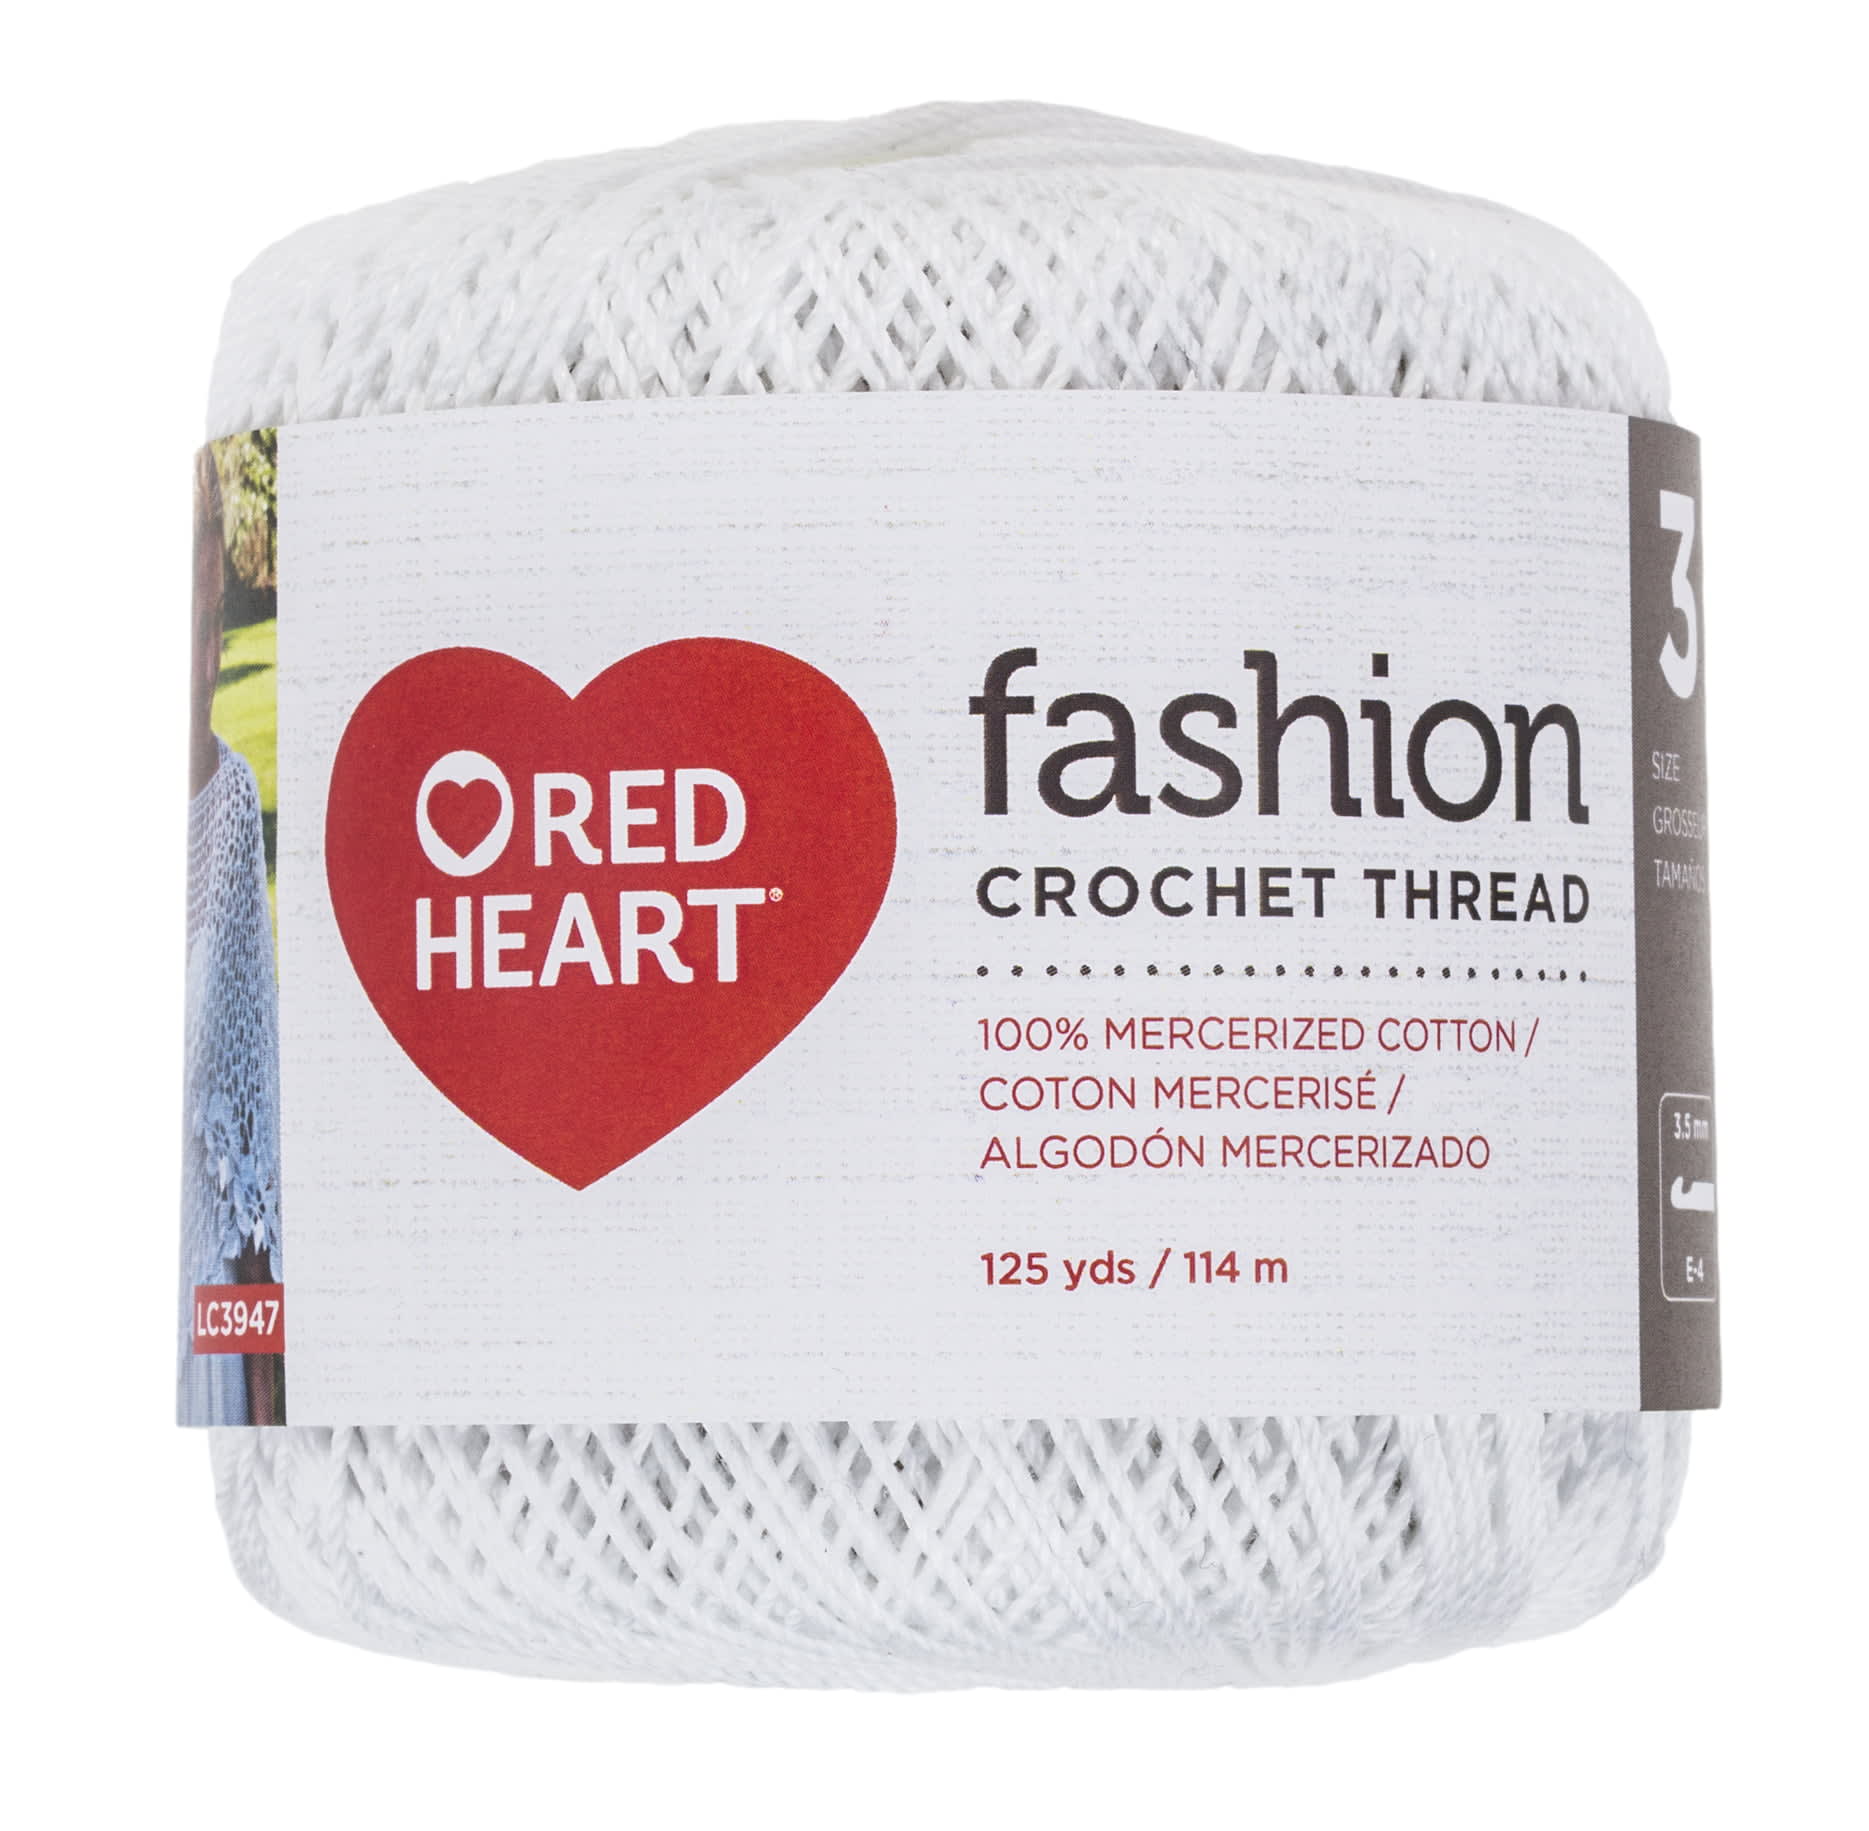 Red Heart Super Saver Metallic 4 Medium Acrylic Yarn, Red 5oz/142g, 255  Yards - DroneUp Delivery